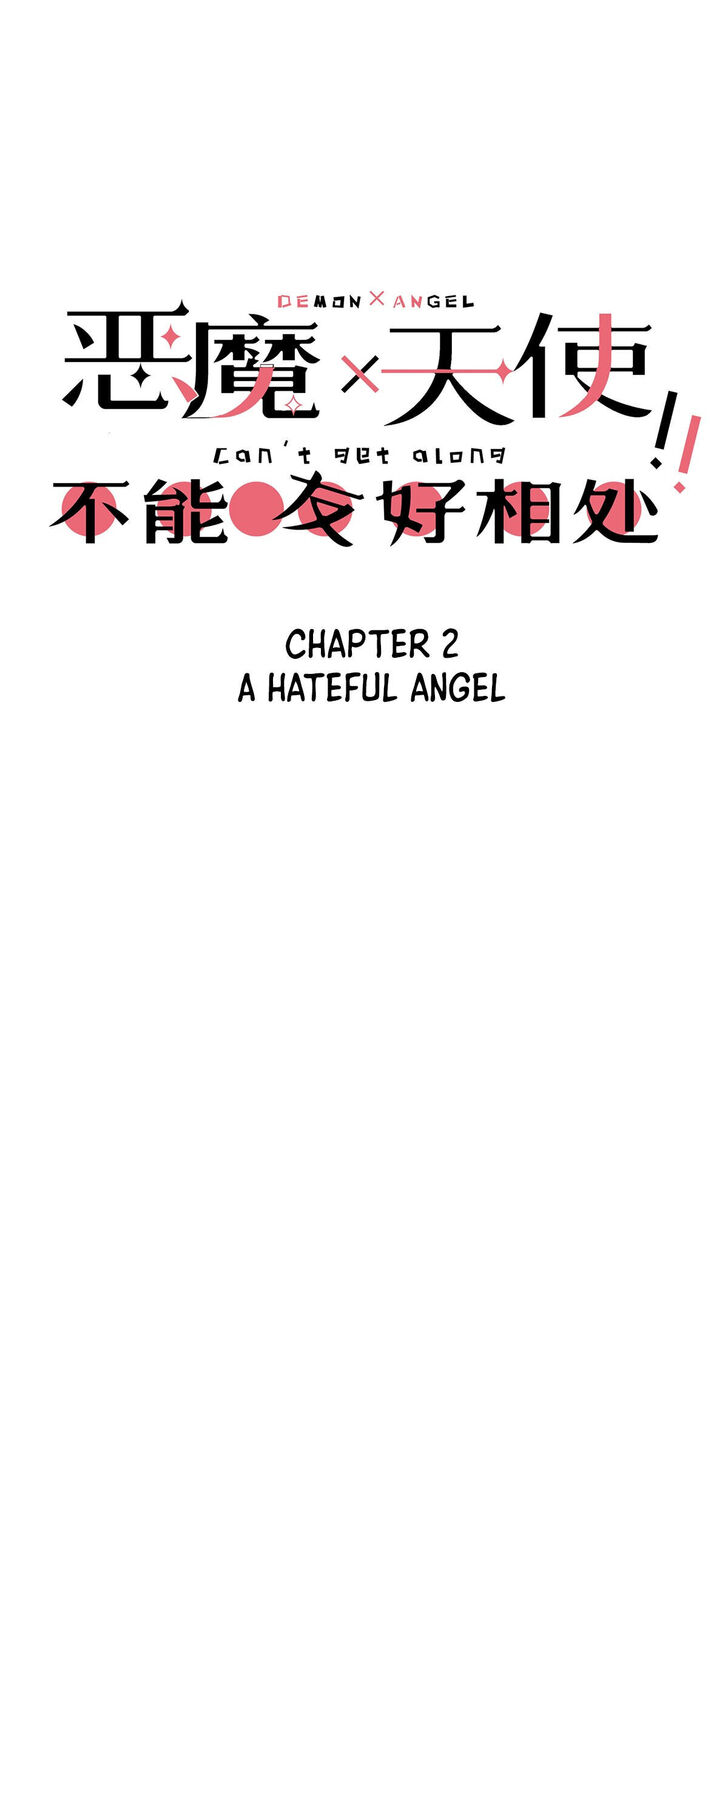 Demon X Angel, Can't Get Along! Demon X Angel, Can't Get Along! Ch.002